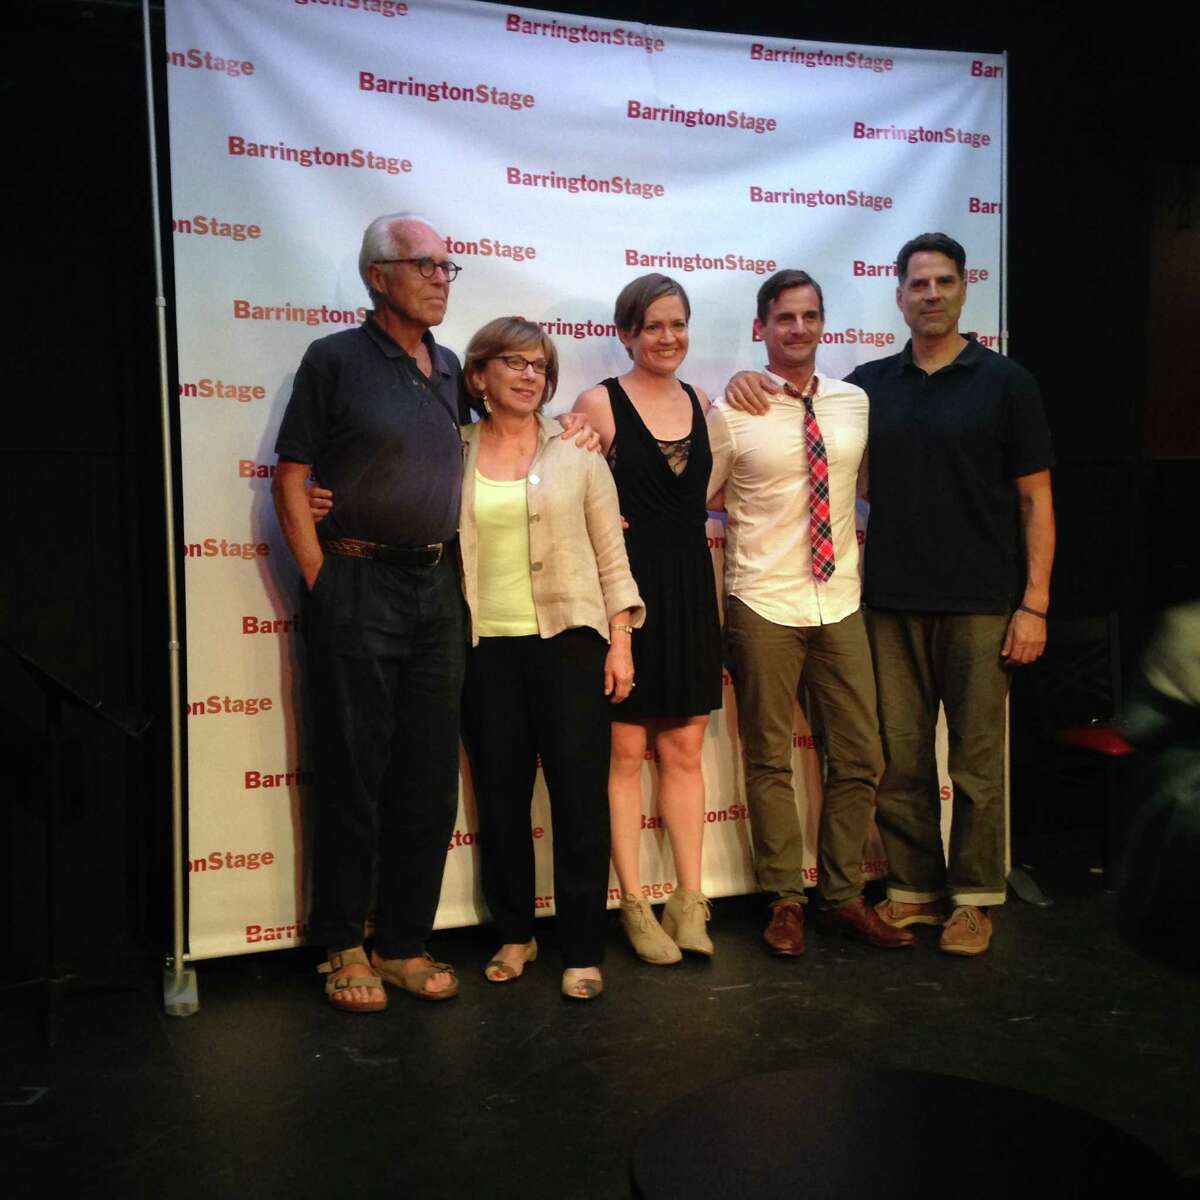 From left: John Guare, Julianne Boyd, Jane Pfitsch, Mark H. Dold and Christopher Innvar. (Photo by Amy Biancolli)